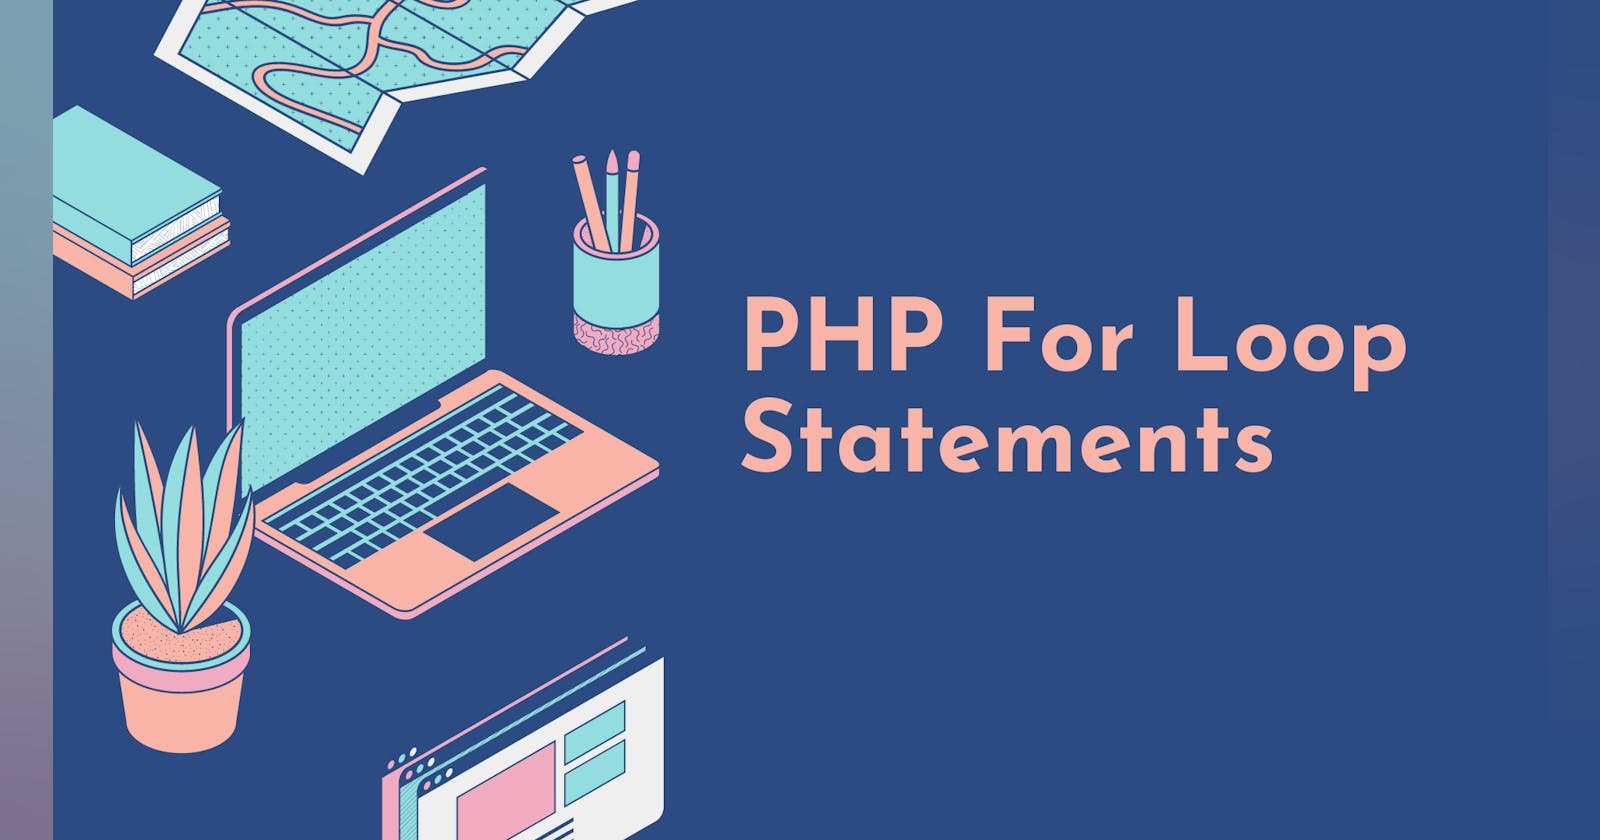 PHP For Loop Statements